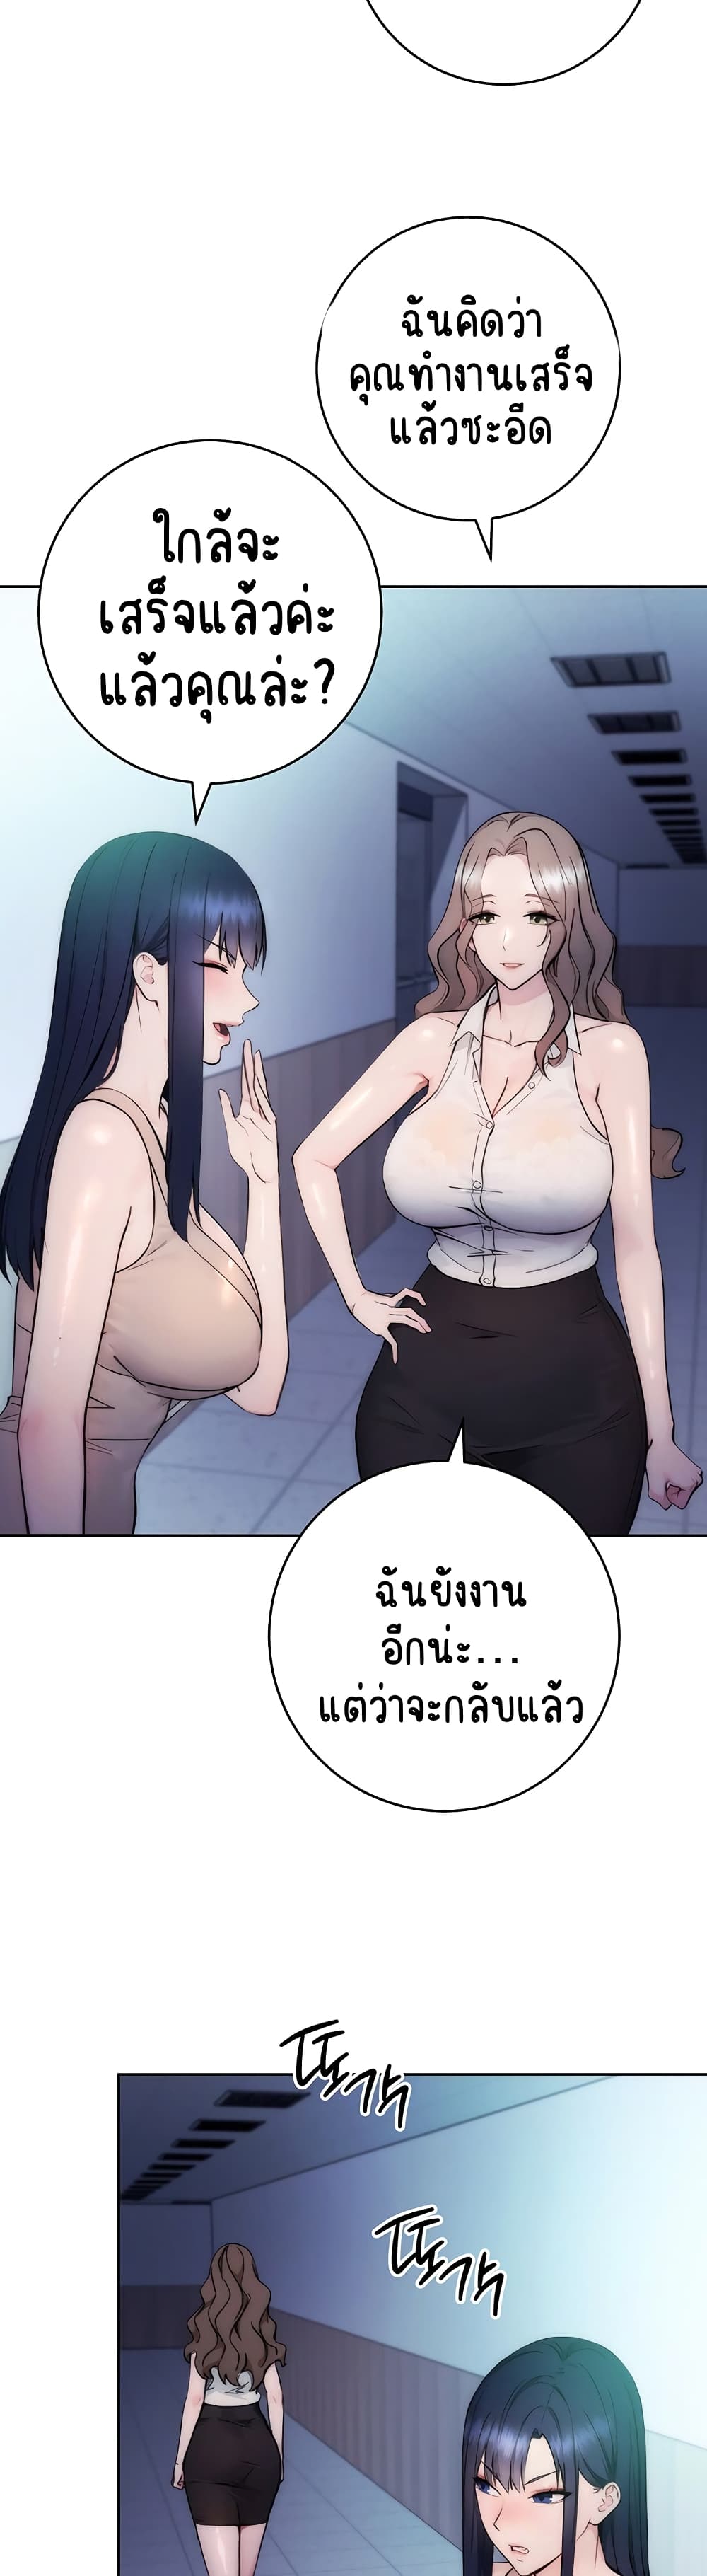 Outsider: The Invisible Man ตอนที่ 1 ภาพ 72